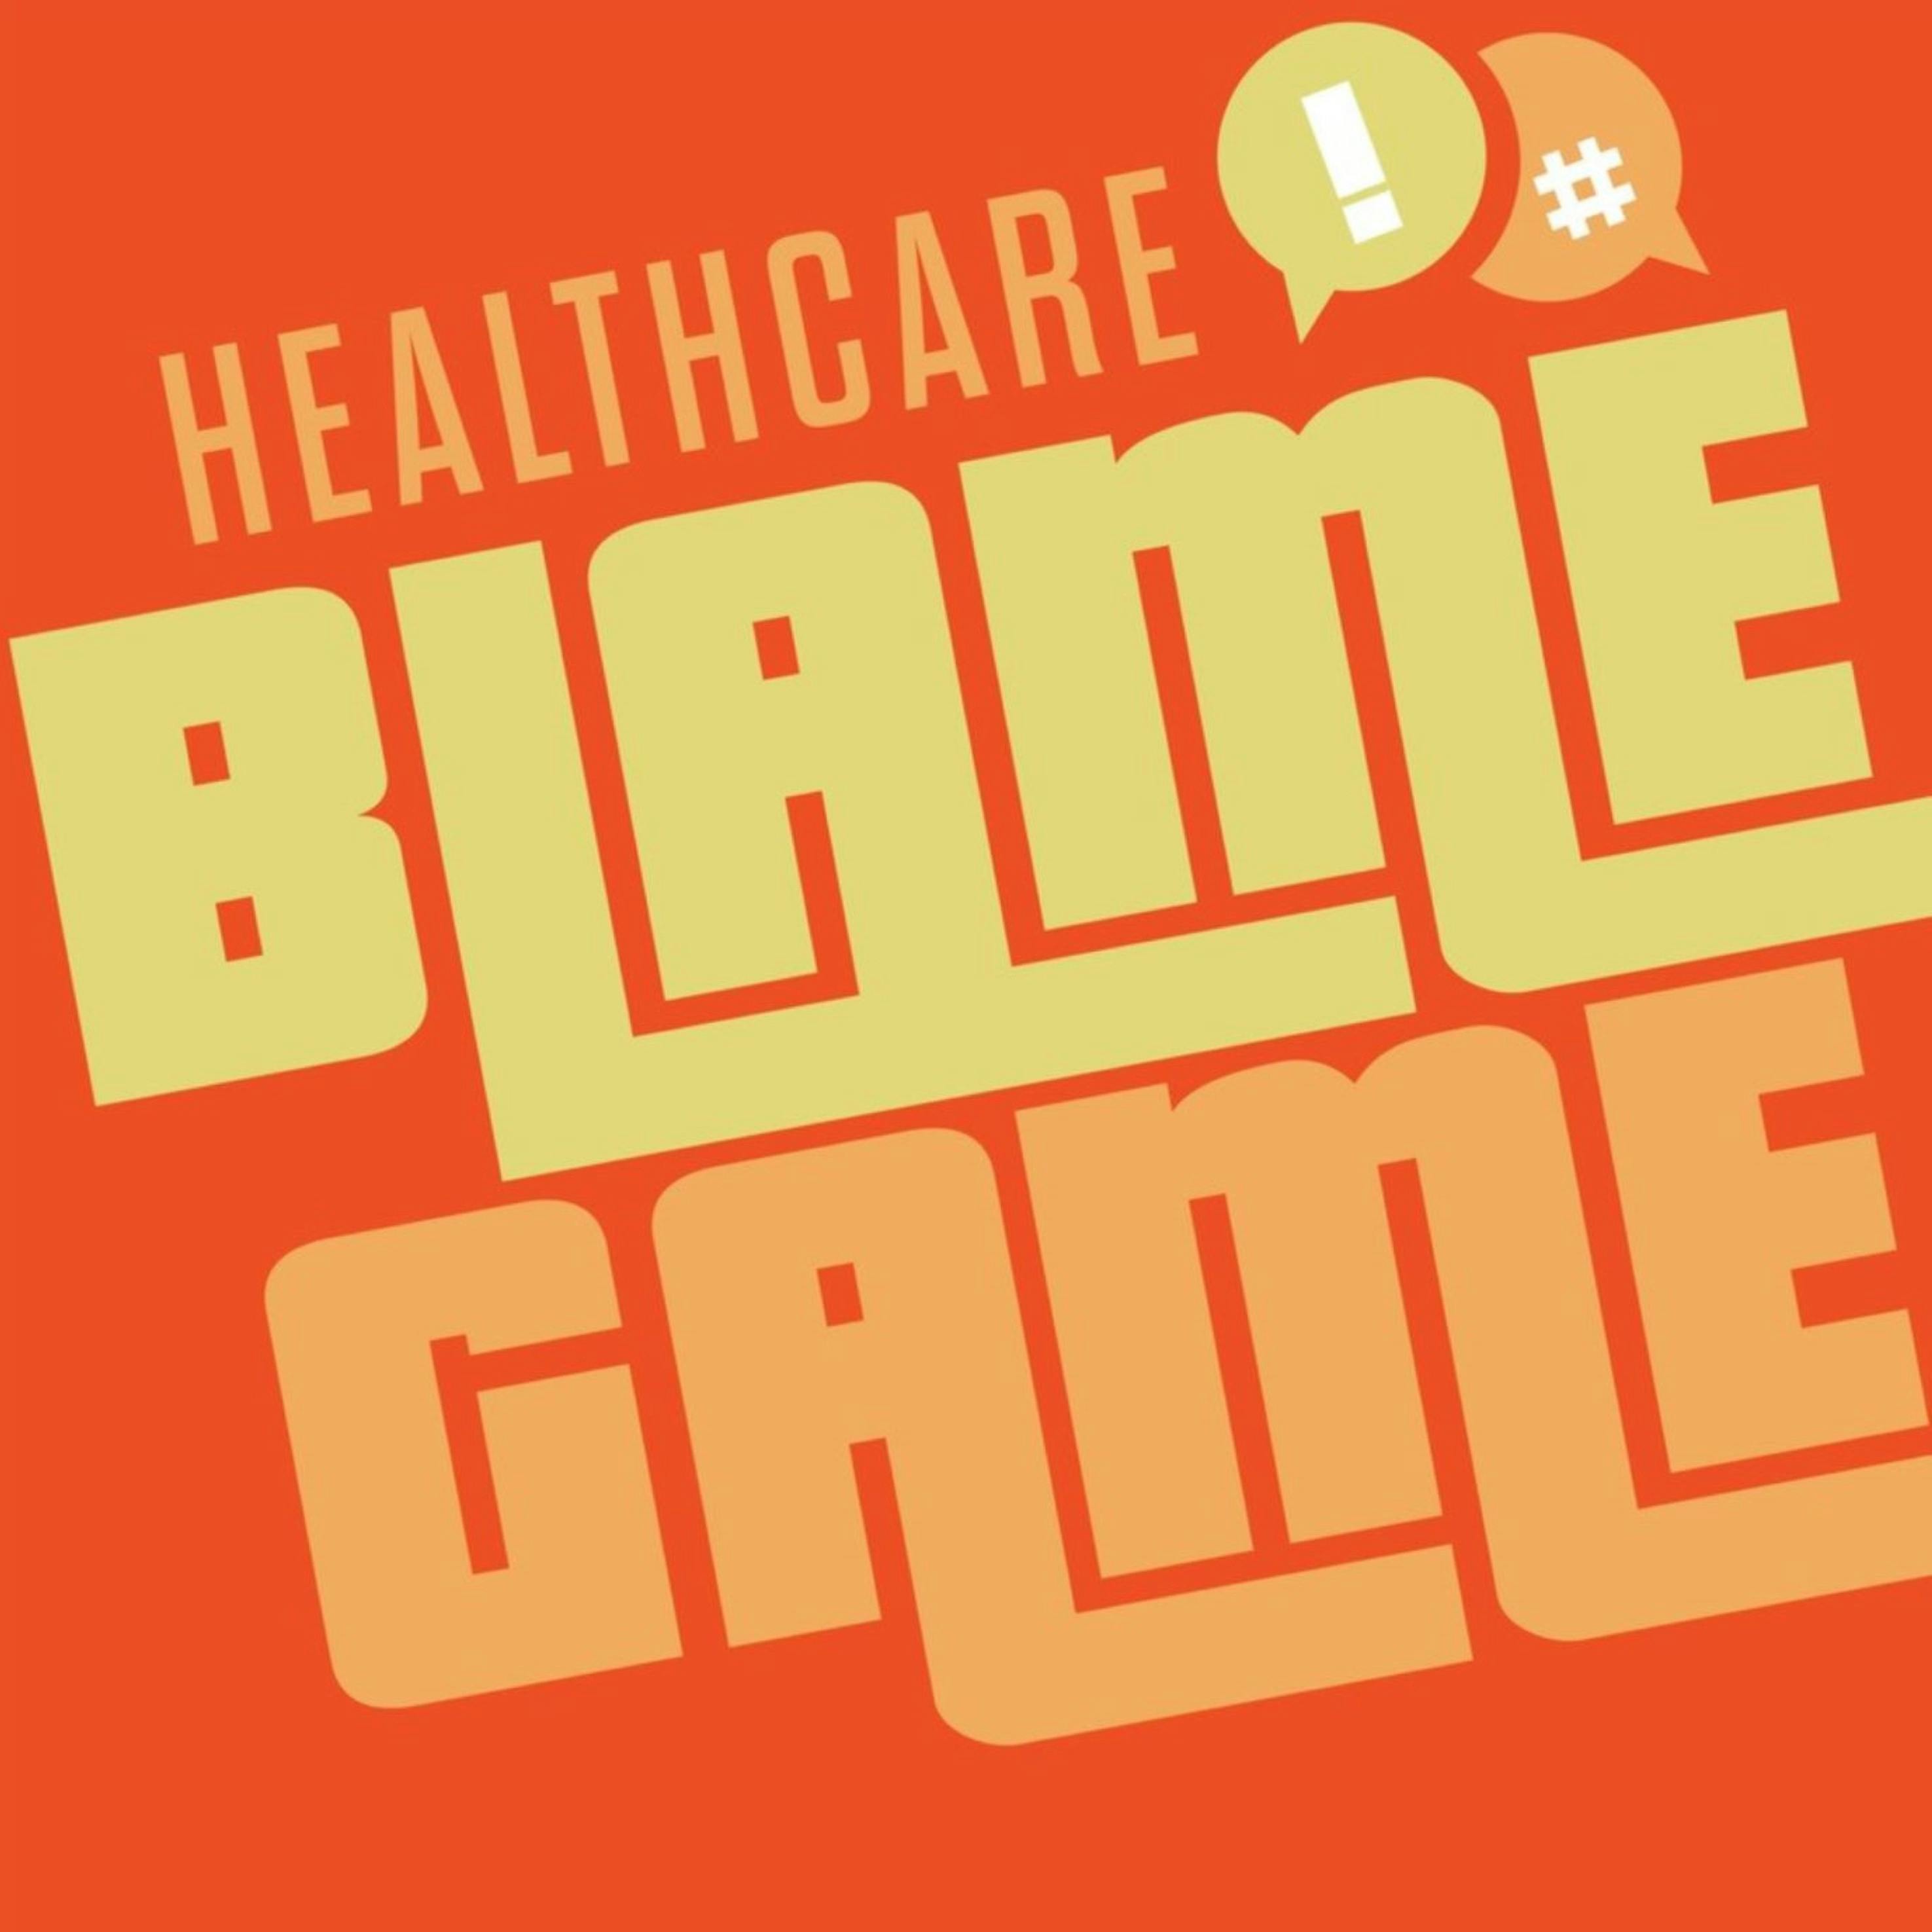 Healthcare Blame Game: Reporter’s are knee-deep in press releases. Most lack context.